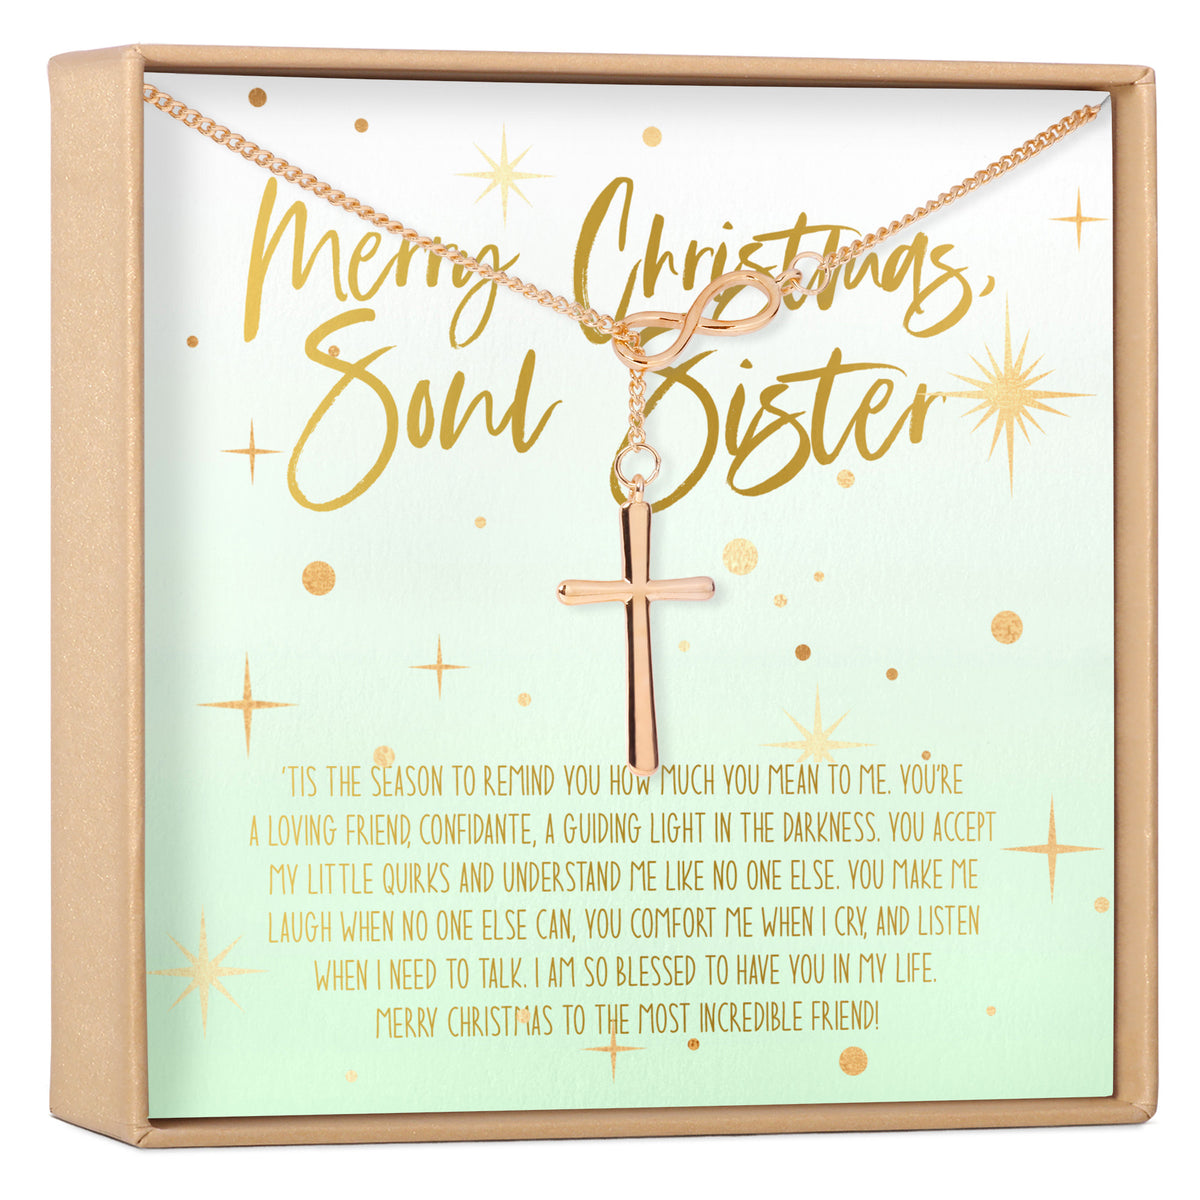 Soul Sisters Christmas Necklace, Multiple Styles